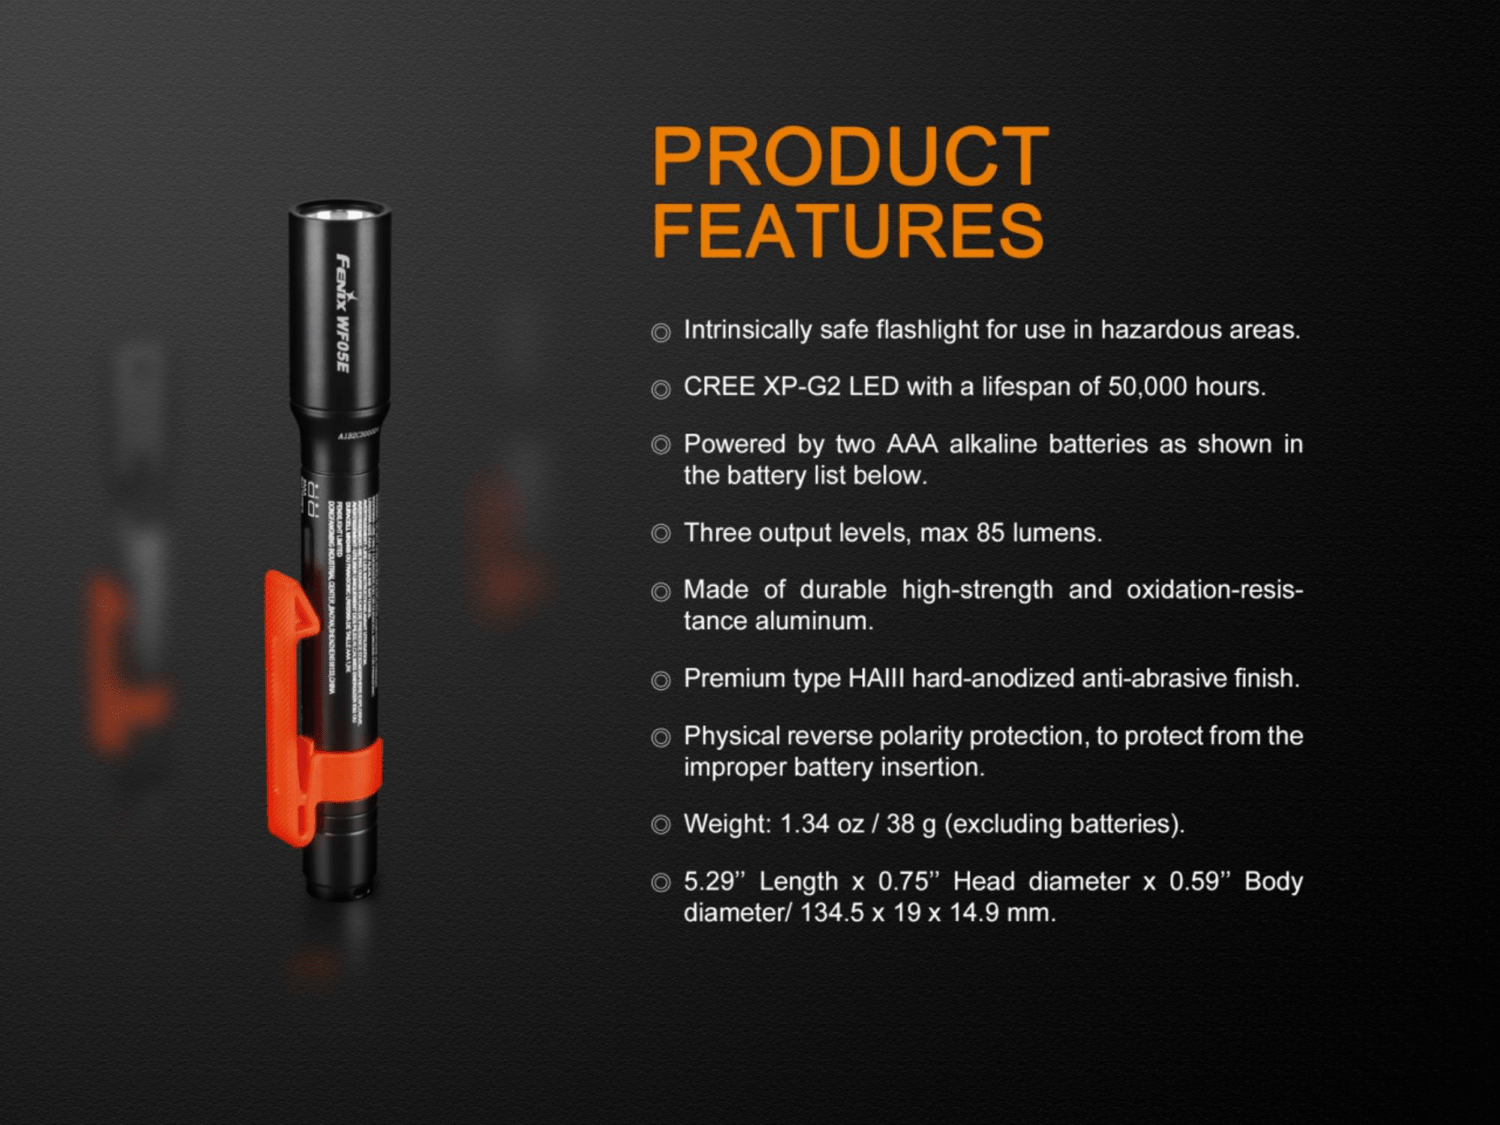 Fenix WF05E LED Flashlight, Intrinsically Safe Explosion Flameproof Torch in India, Pen Size Industrial Safe Torch, AA Battery Flashlight for Industrial Use